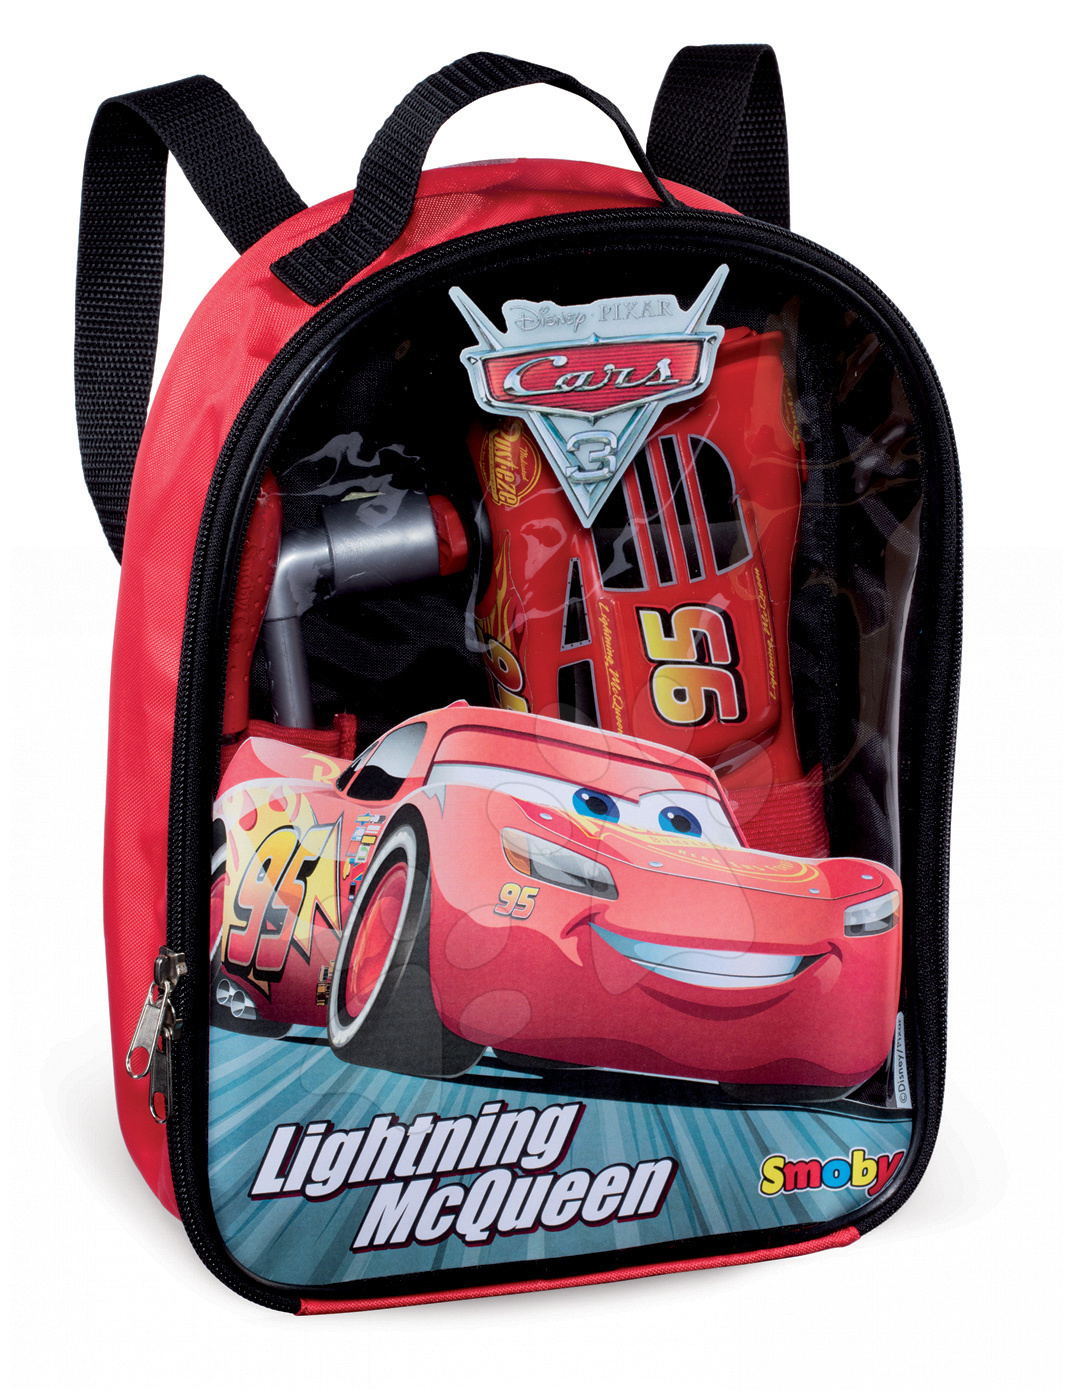 Play tools - Backpack with tools Cars 3 Smoby and a McQueen toy car made of building blocks